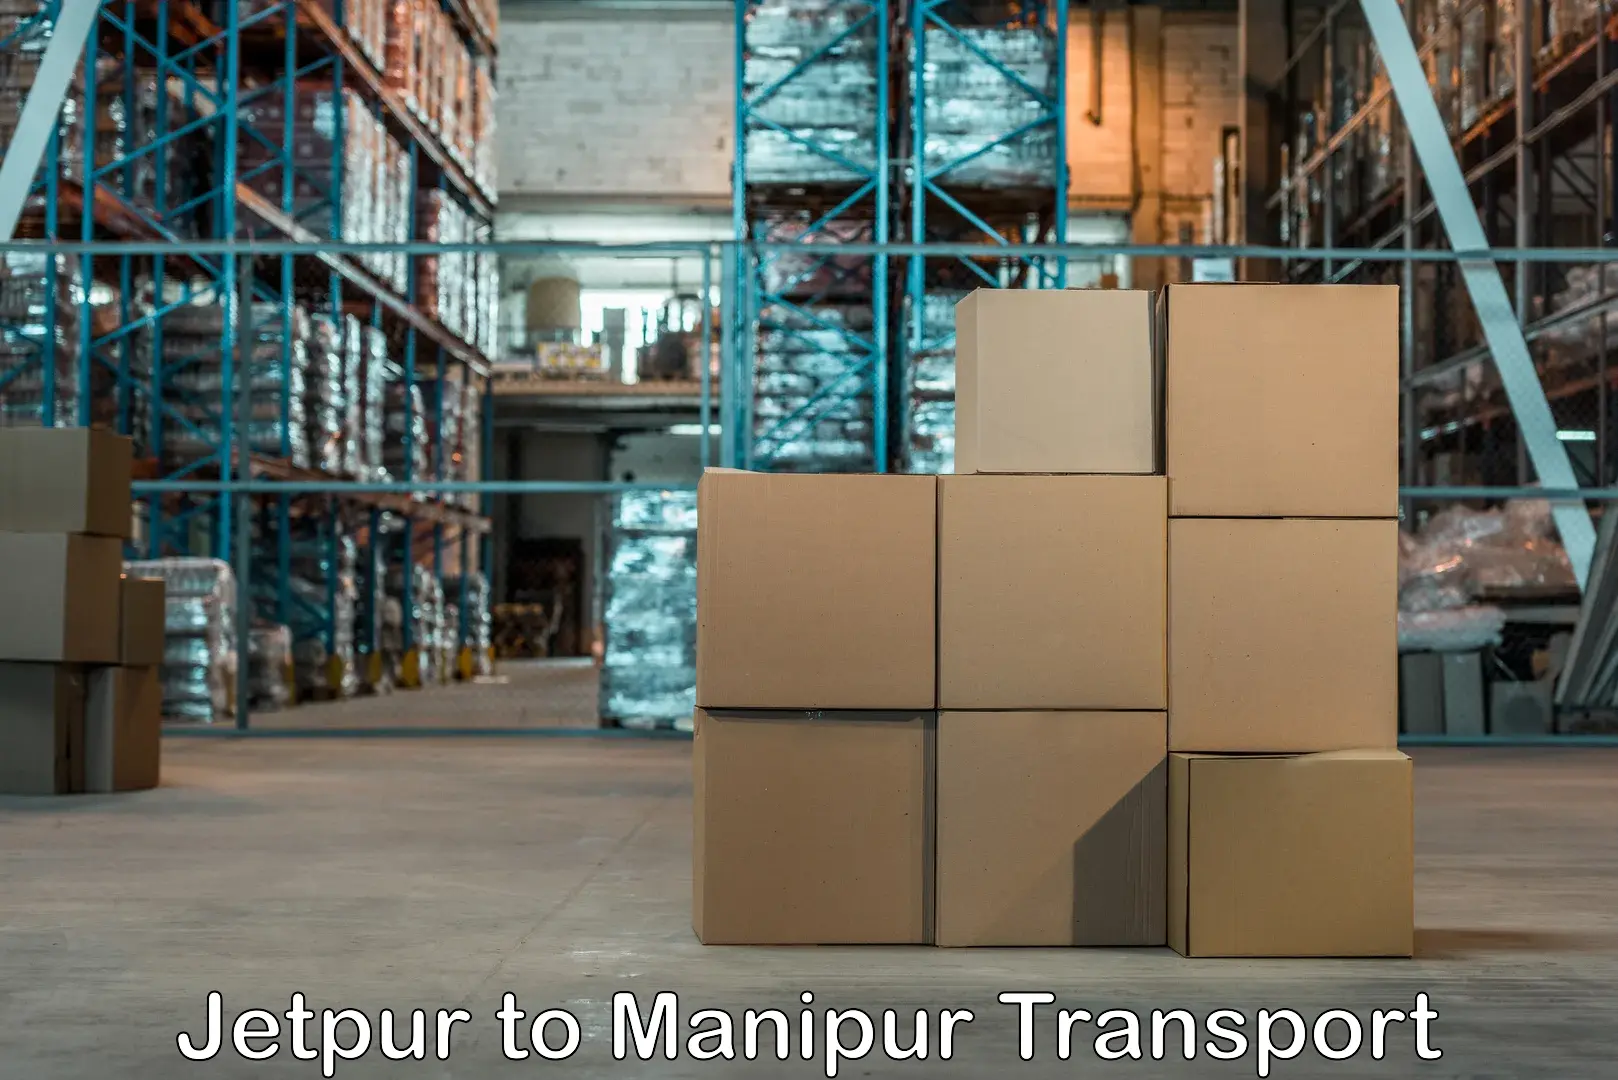 Nearby transport service Jetpur to Manipur